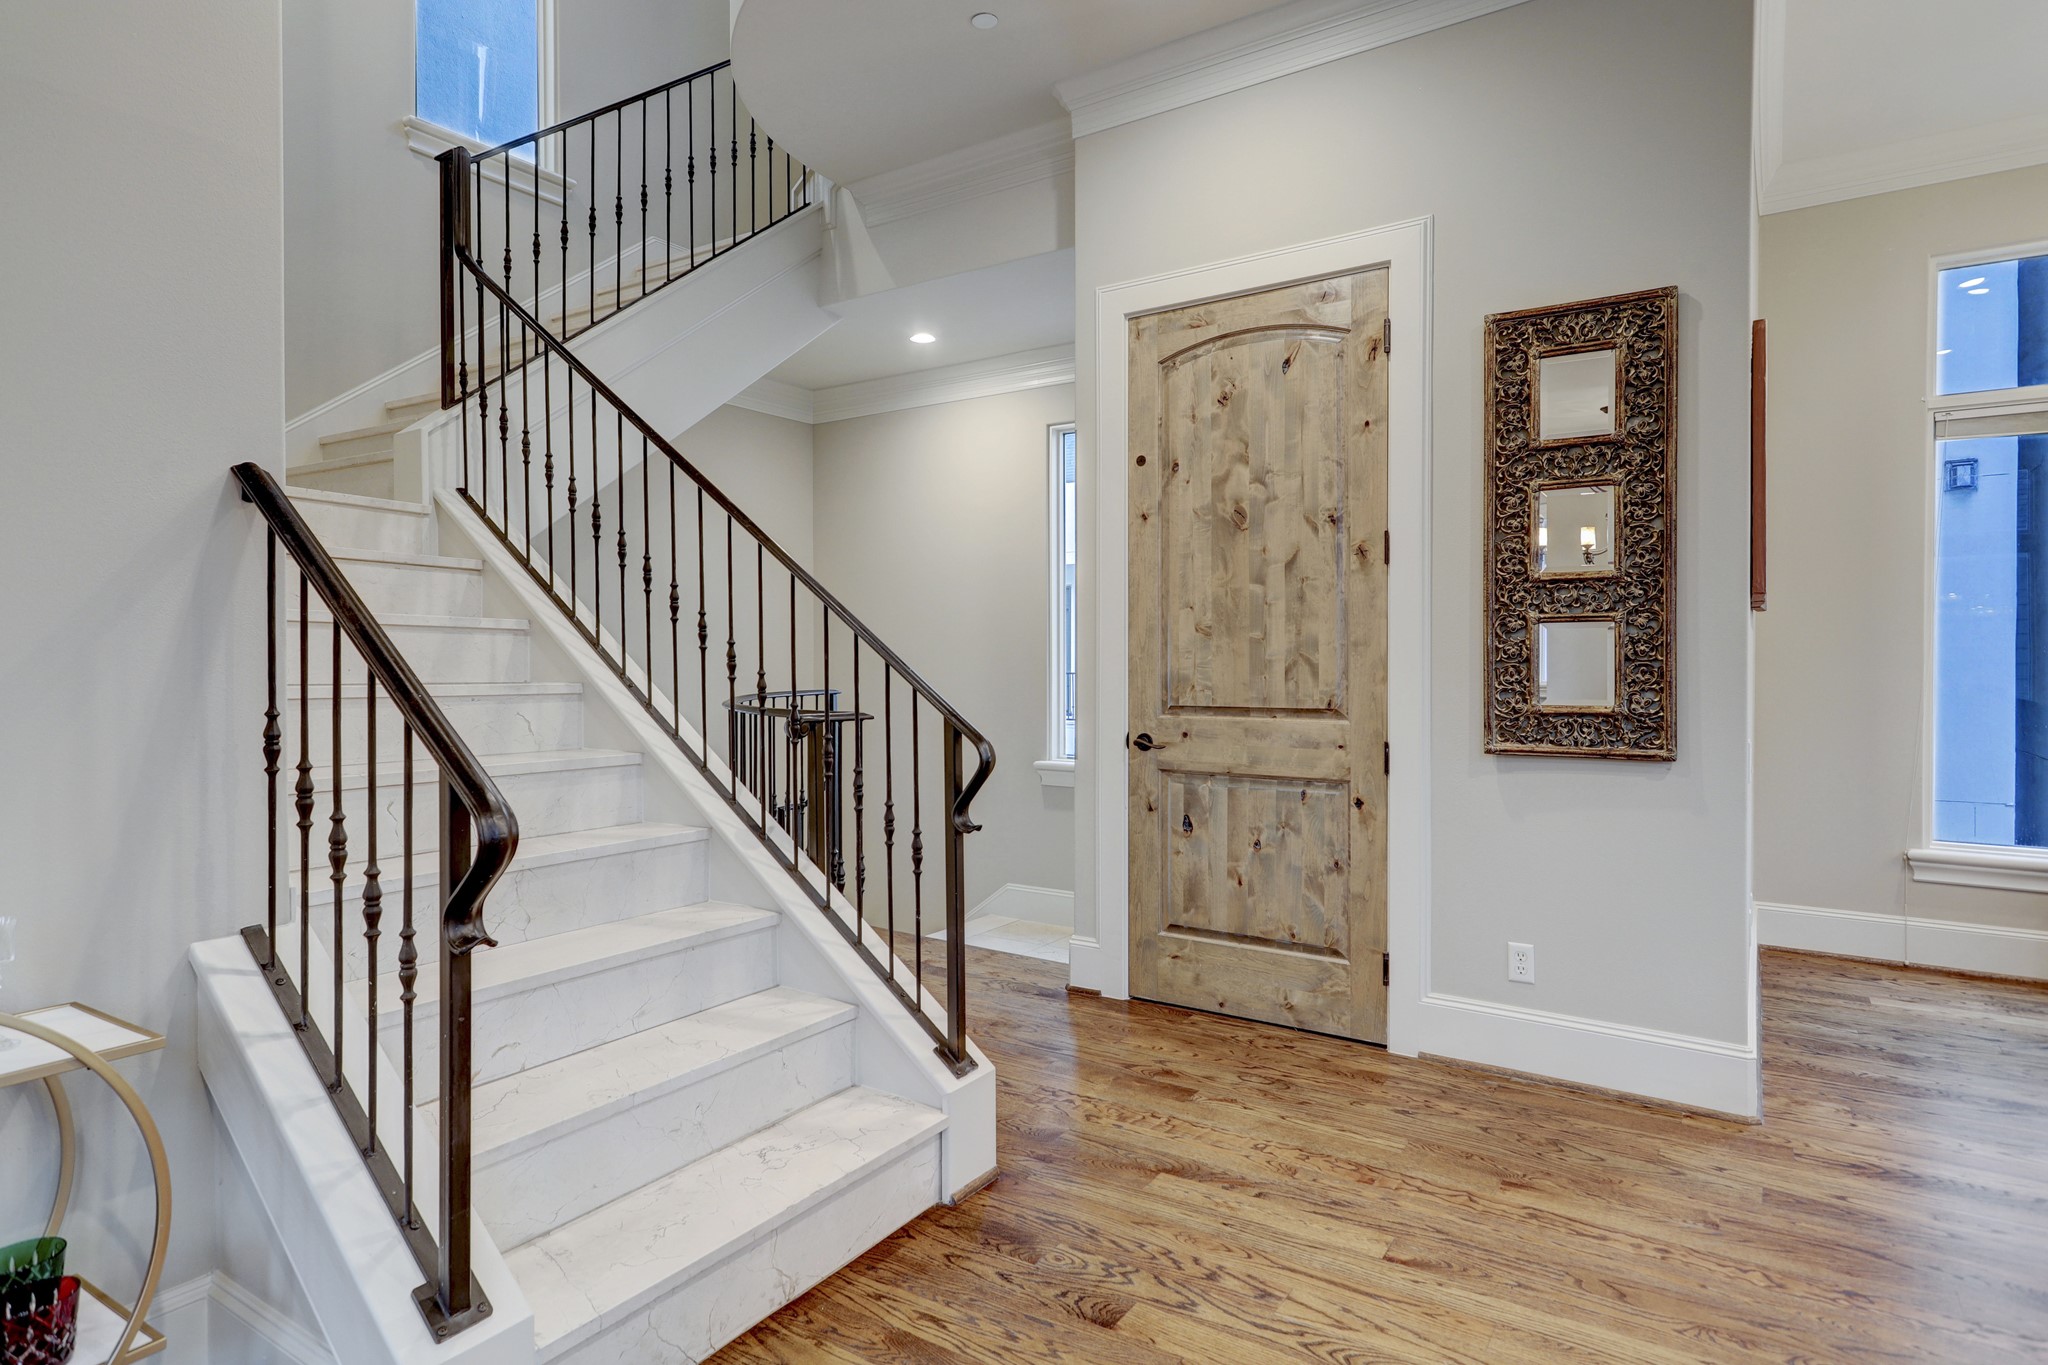 This fabulous stone staircase creates such a sophisticated feel with hard wood floors.